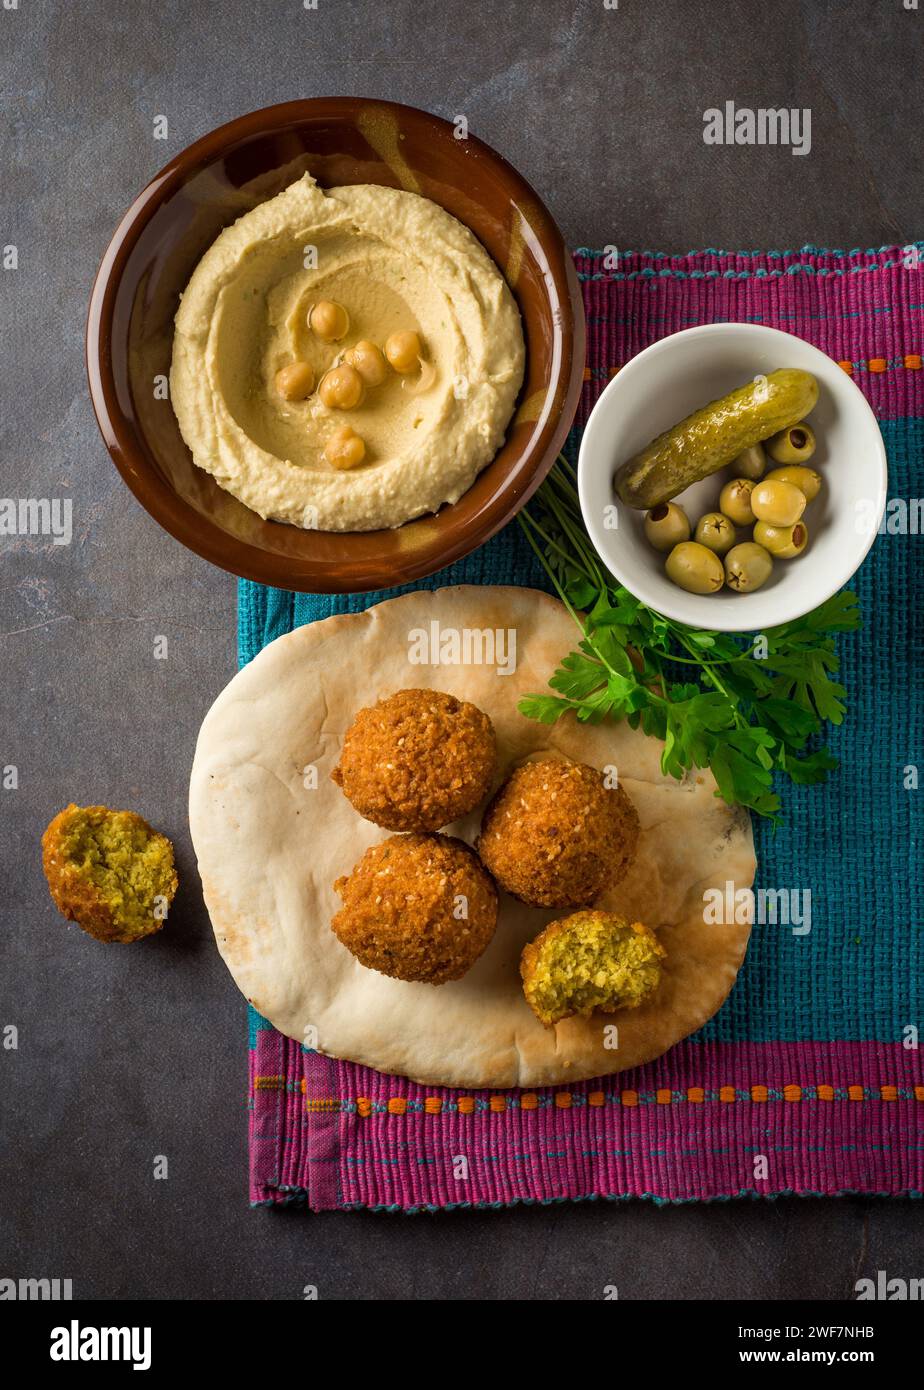 Falafel with hummus, pita bread and pickle. Top view of authentic Middle Eastern cuisine. Stock Photo